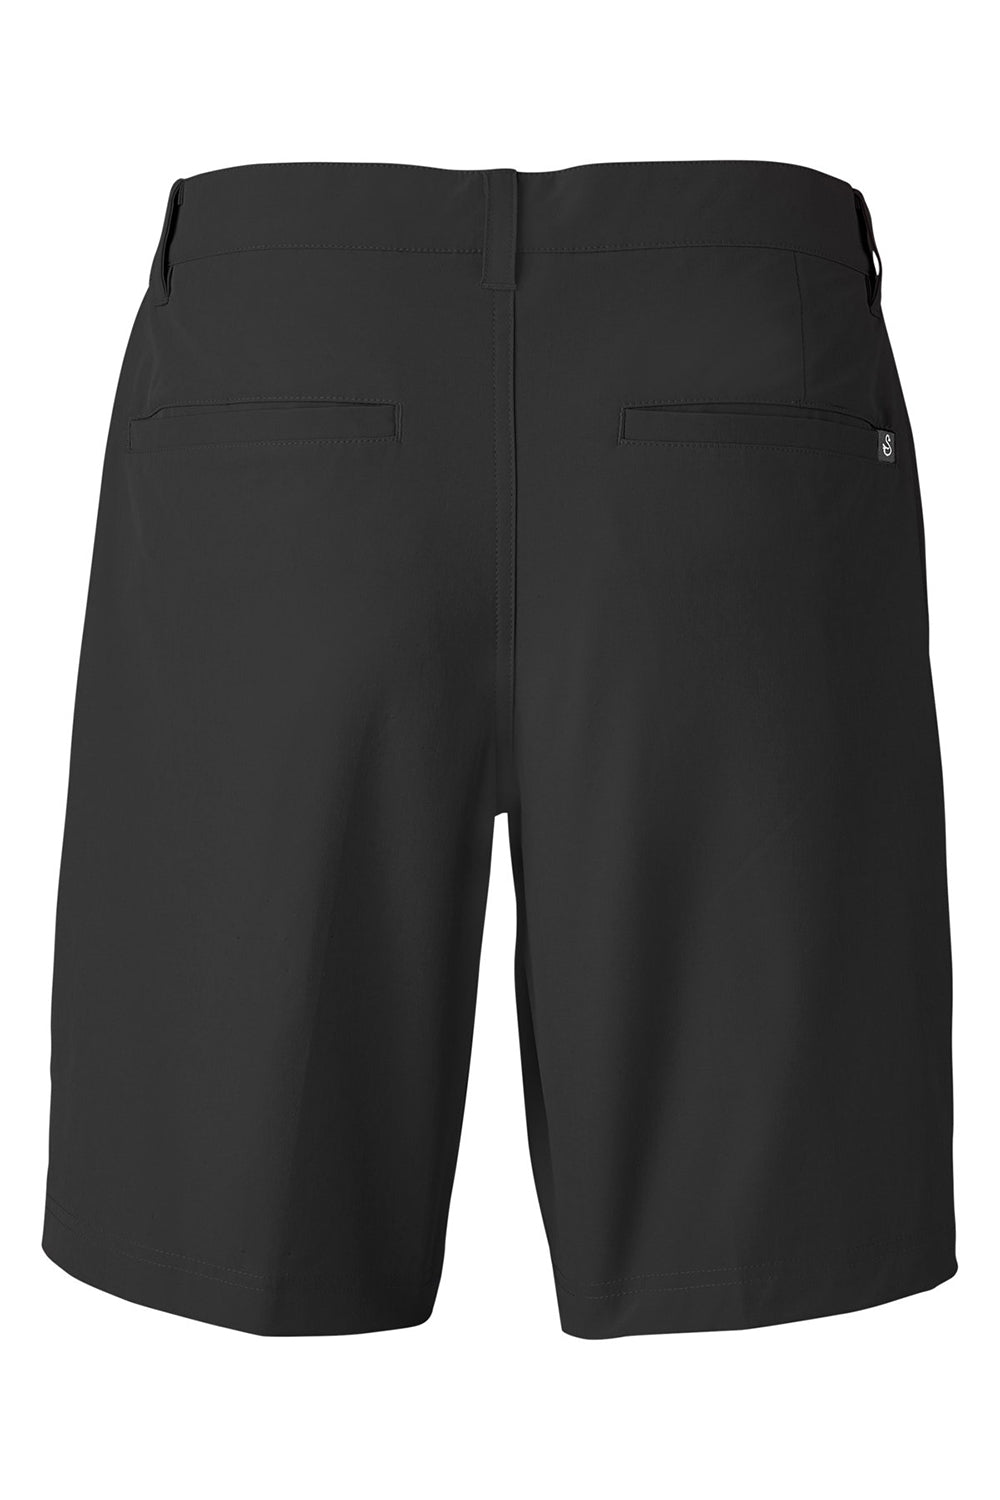 Swannies Golf SWS700 Mens Sully Shorts w/ Pockets Black Flat Back